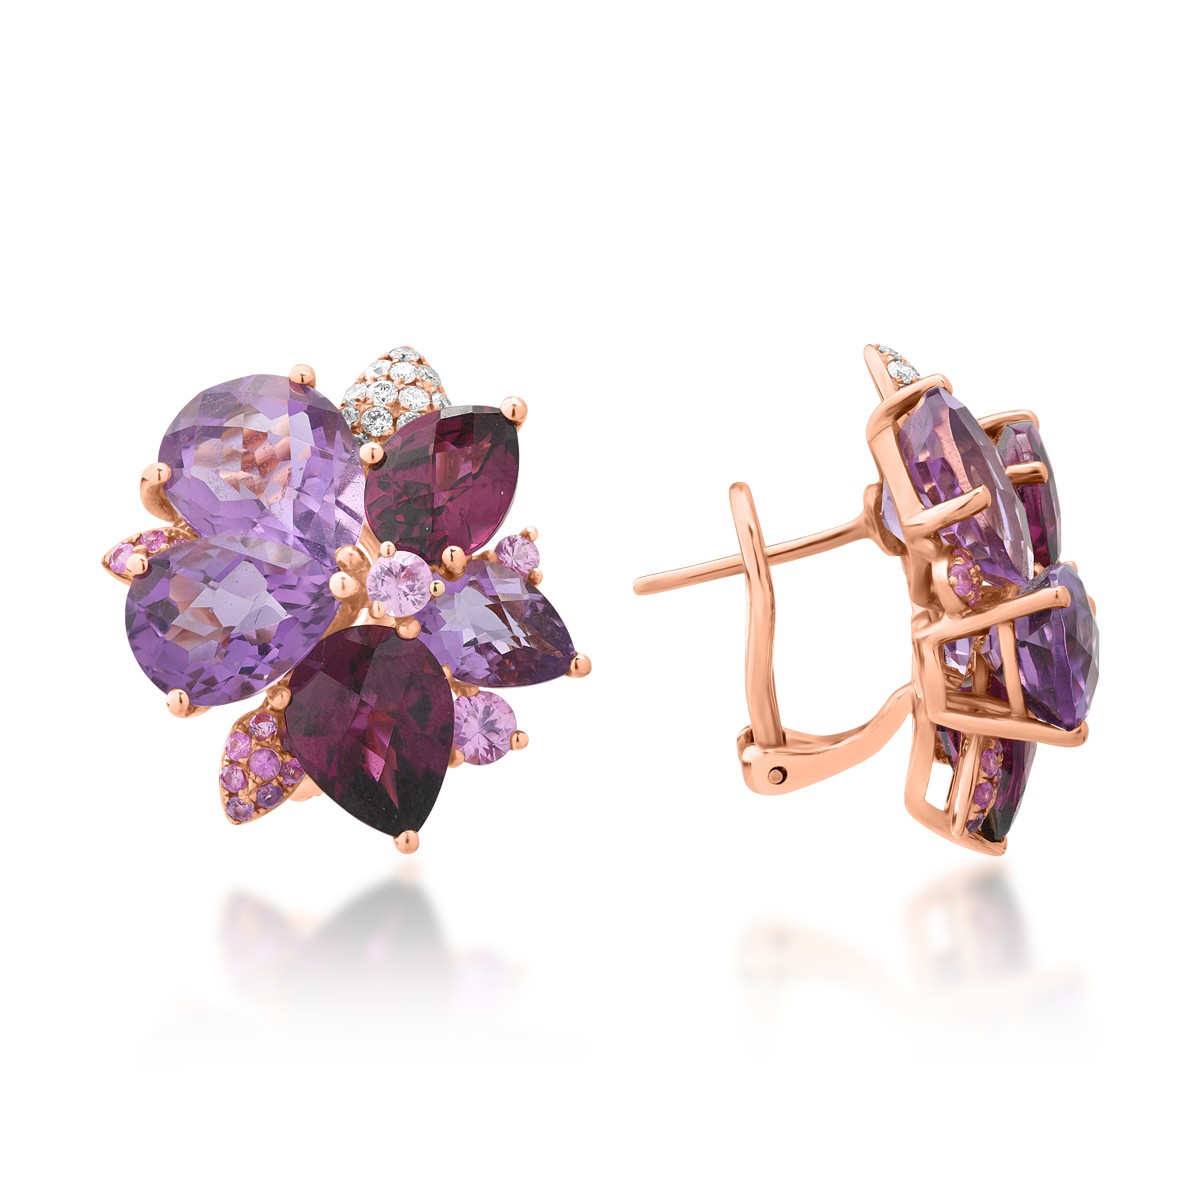 18K rose gold earrings with 9.9ct amethysts and 6.9ct rhodolites